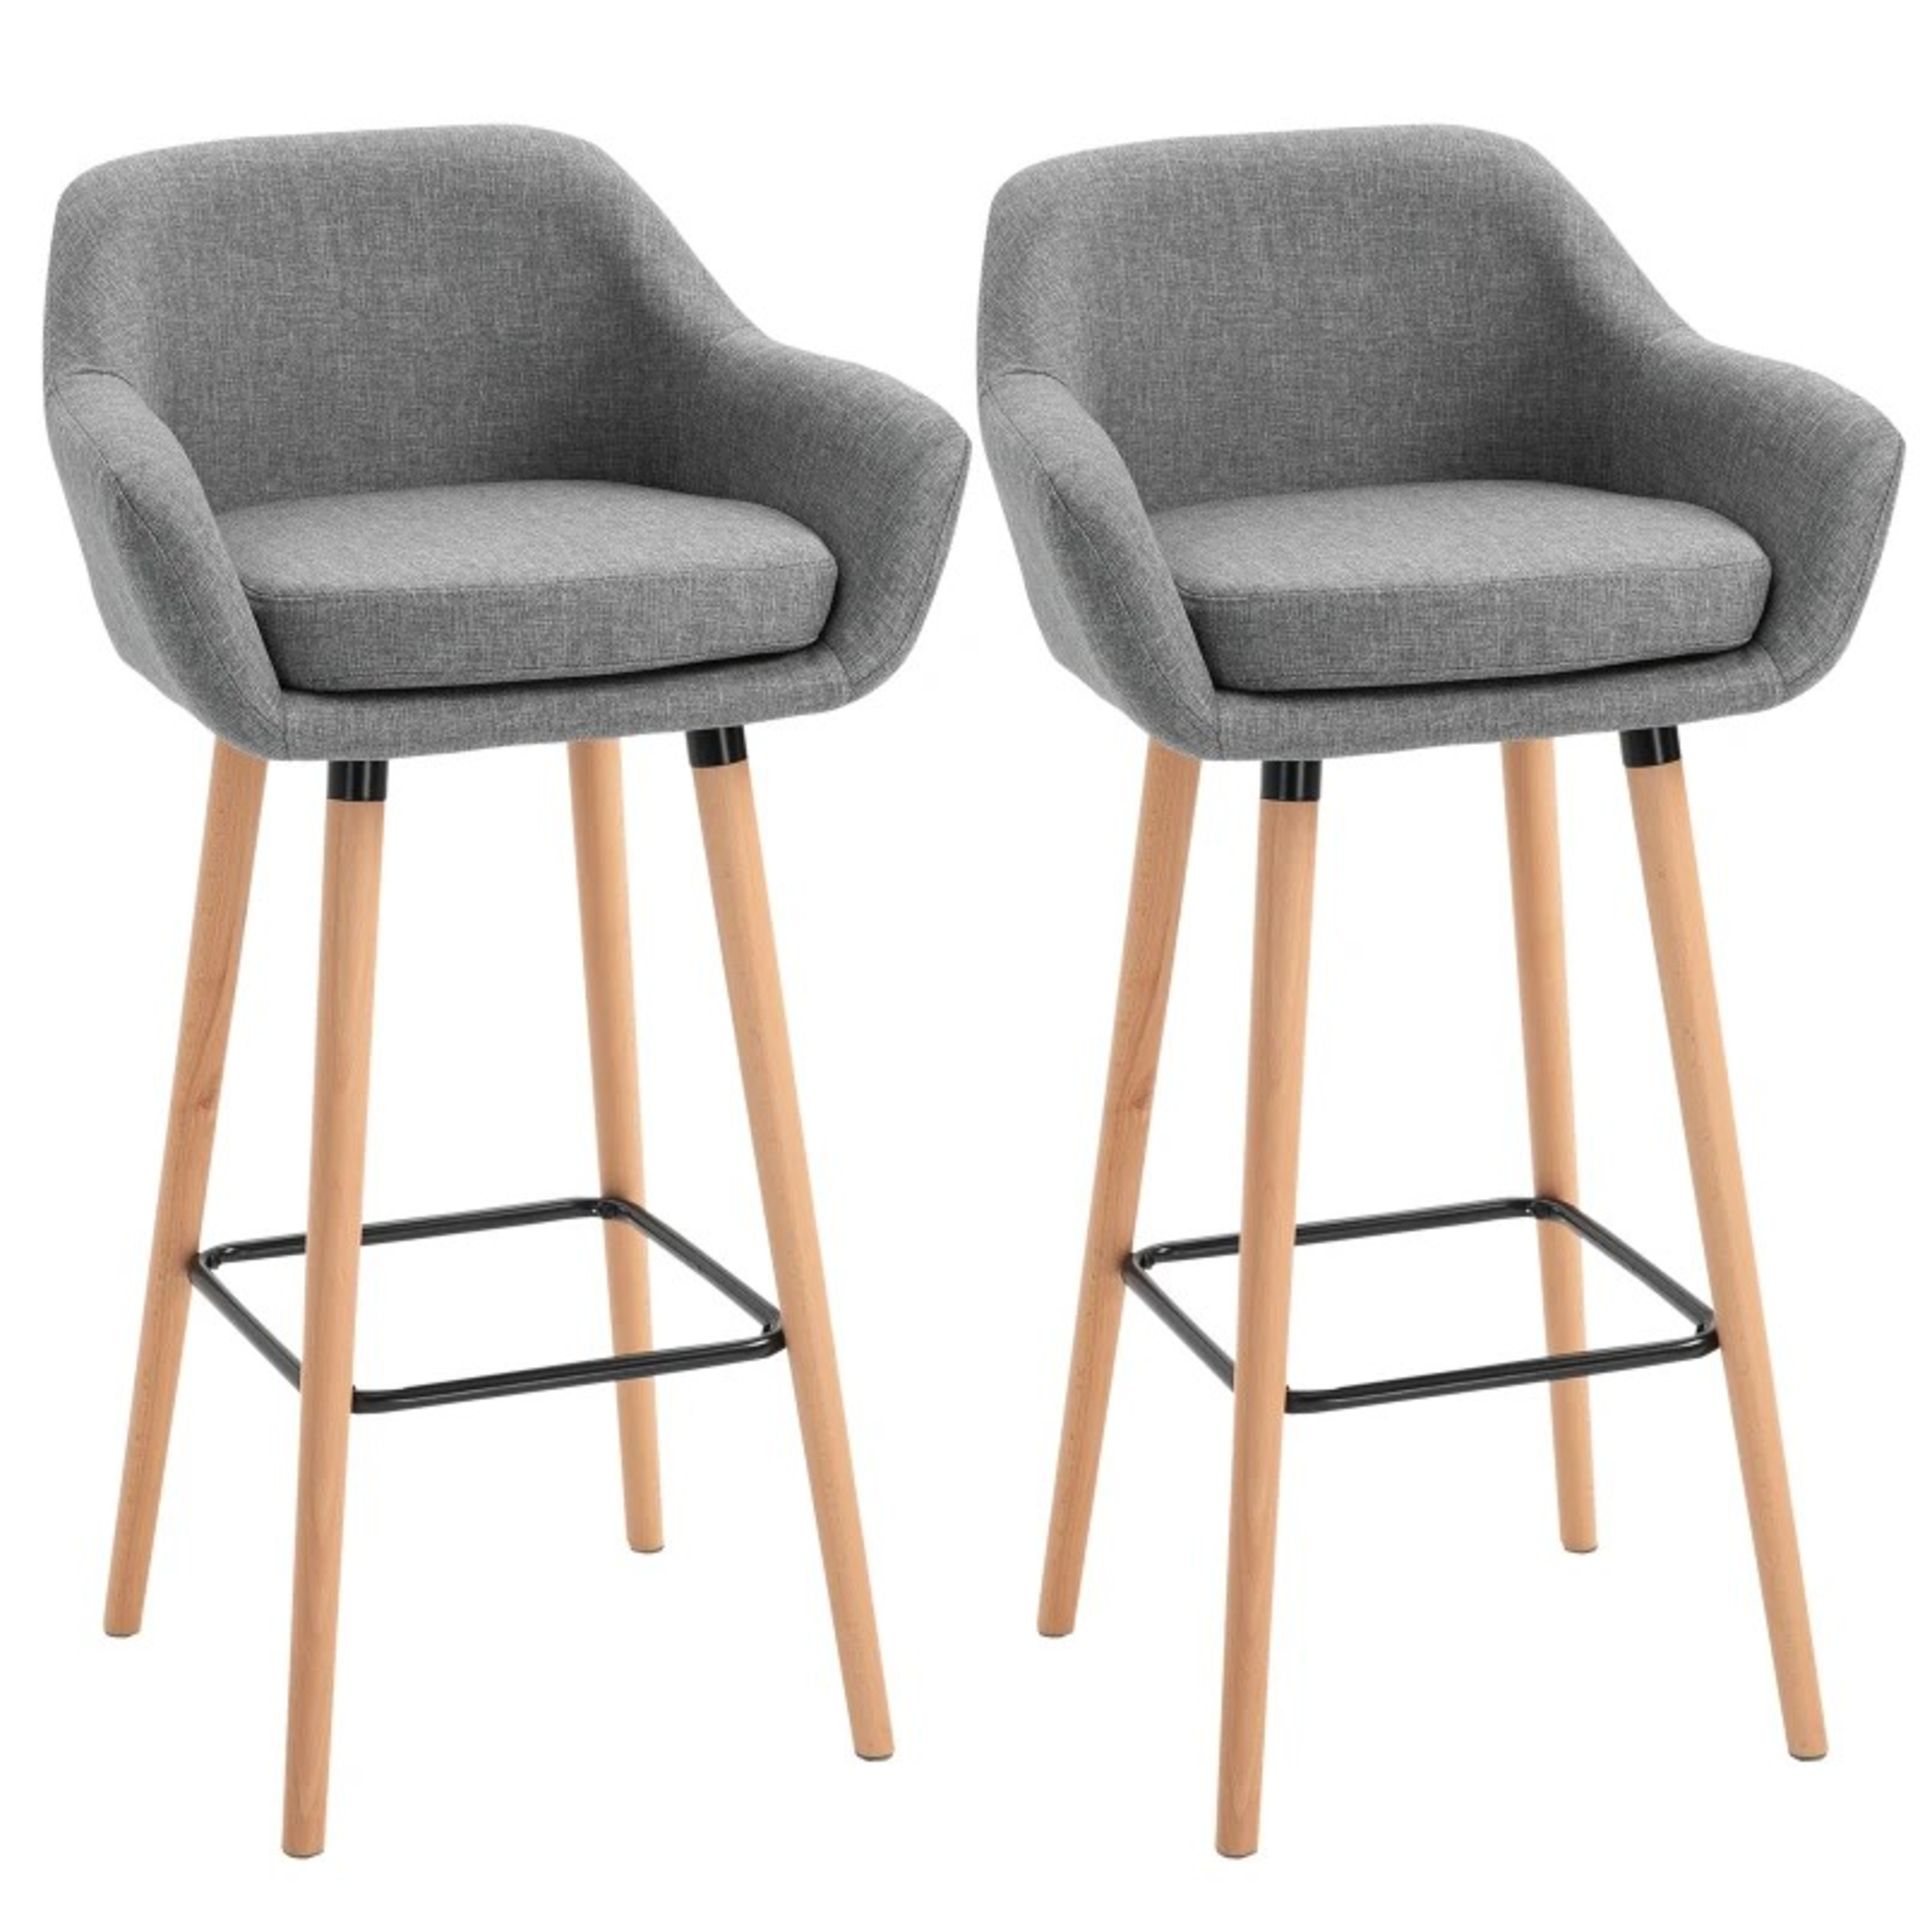 RRP £156.99 - Set of 2 Bar Stools Modern Upholstered Seat Bar Chairs w/ Metal Frame, Solid Wood Legs - Image 2 of 4